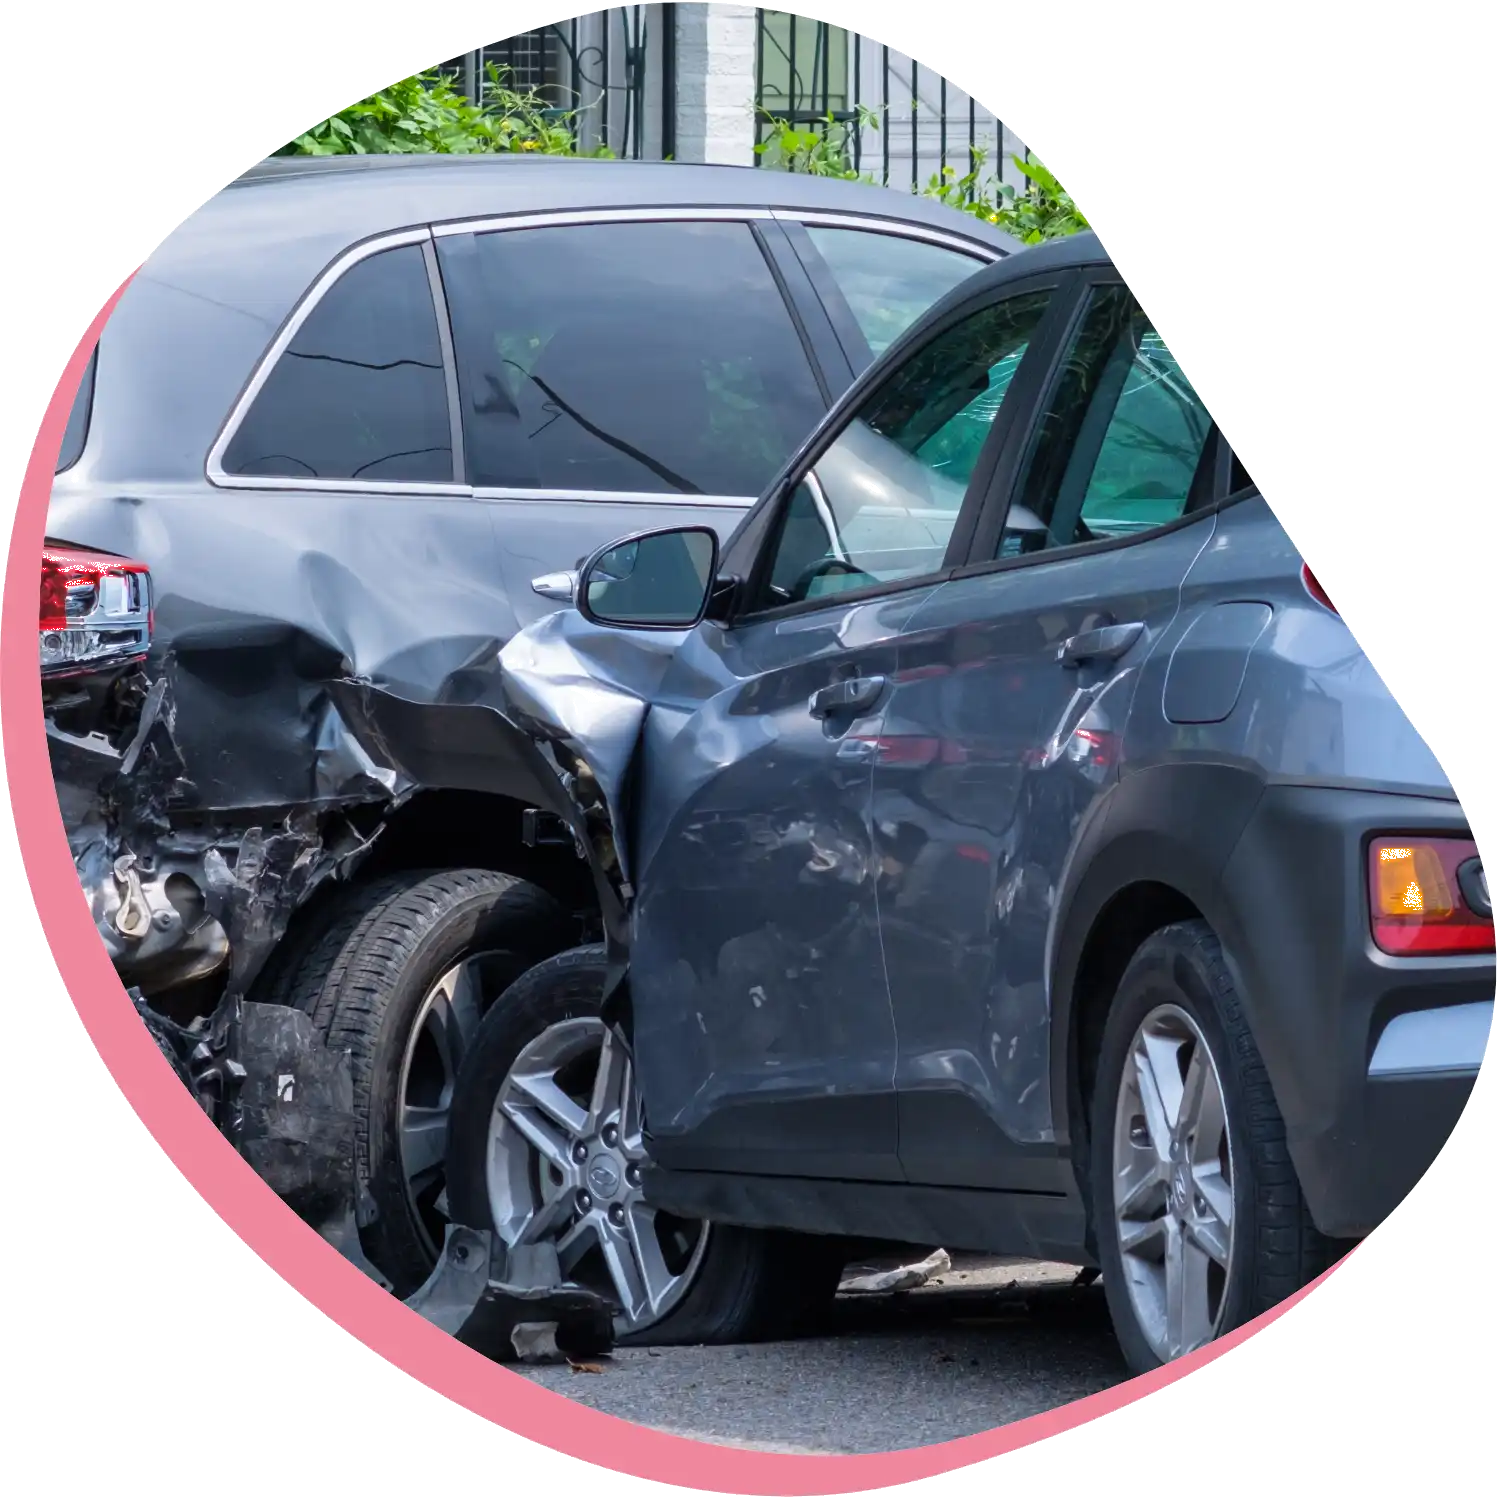 Auto Accidents - Auto accidents can be expensive, and if you're unable to work due to injuries, you may quickly fall behind on bills. A lawsuit loan can help you cover expenses until your case settles.